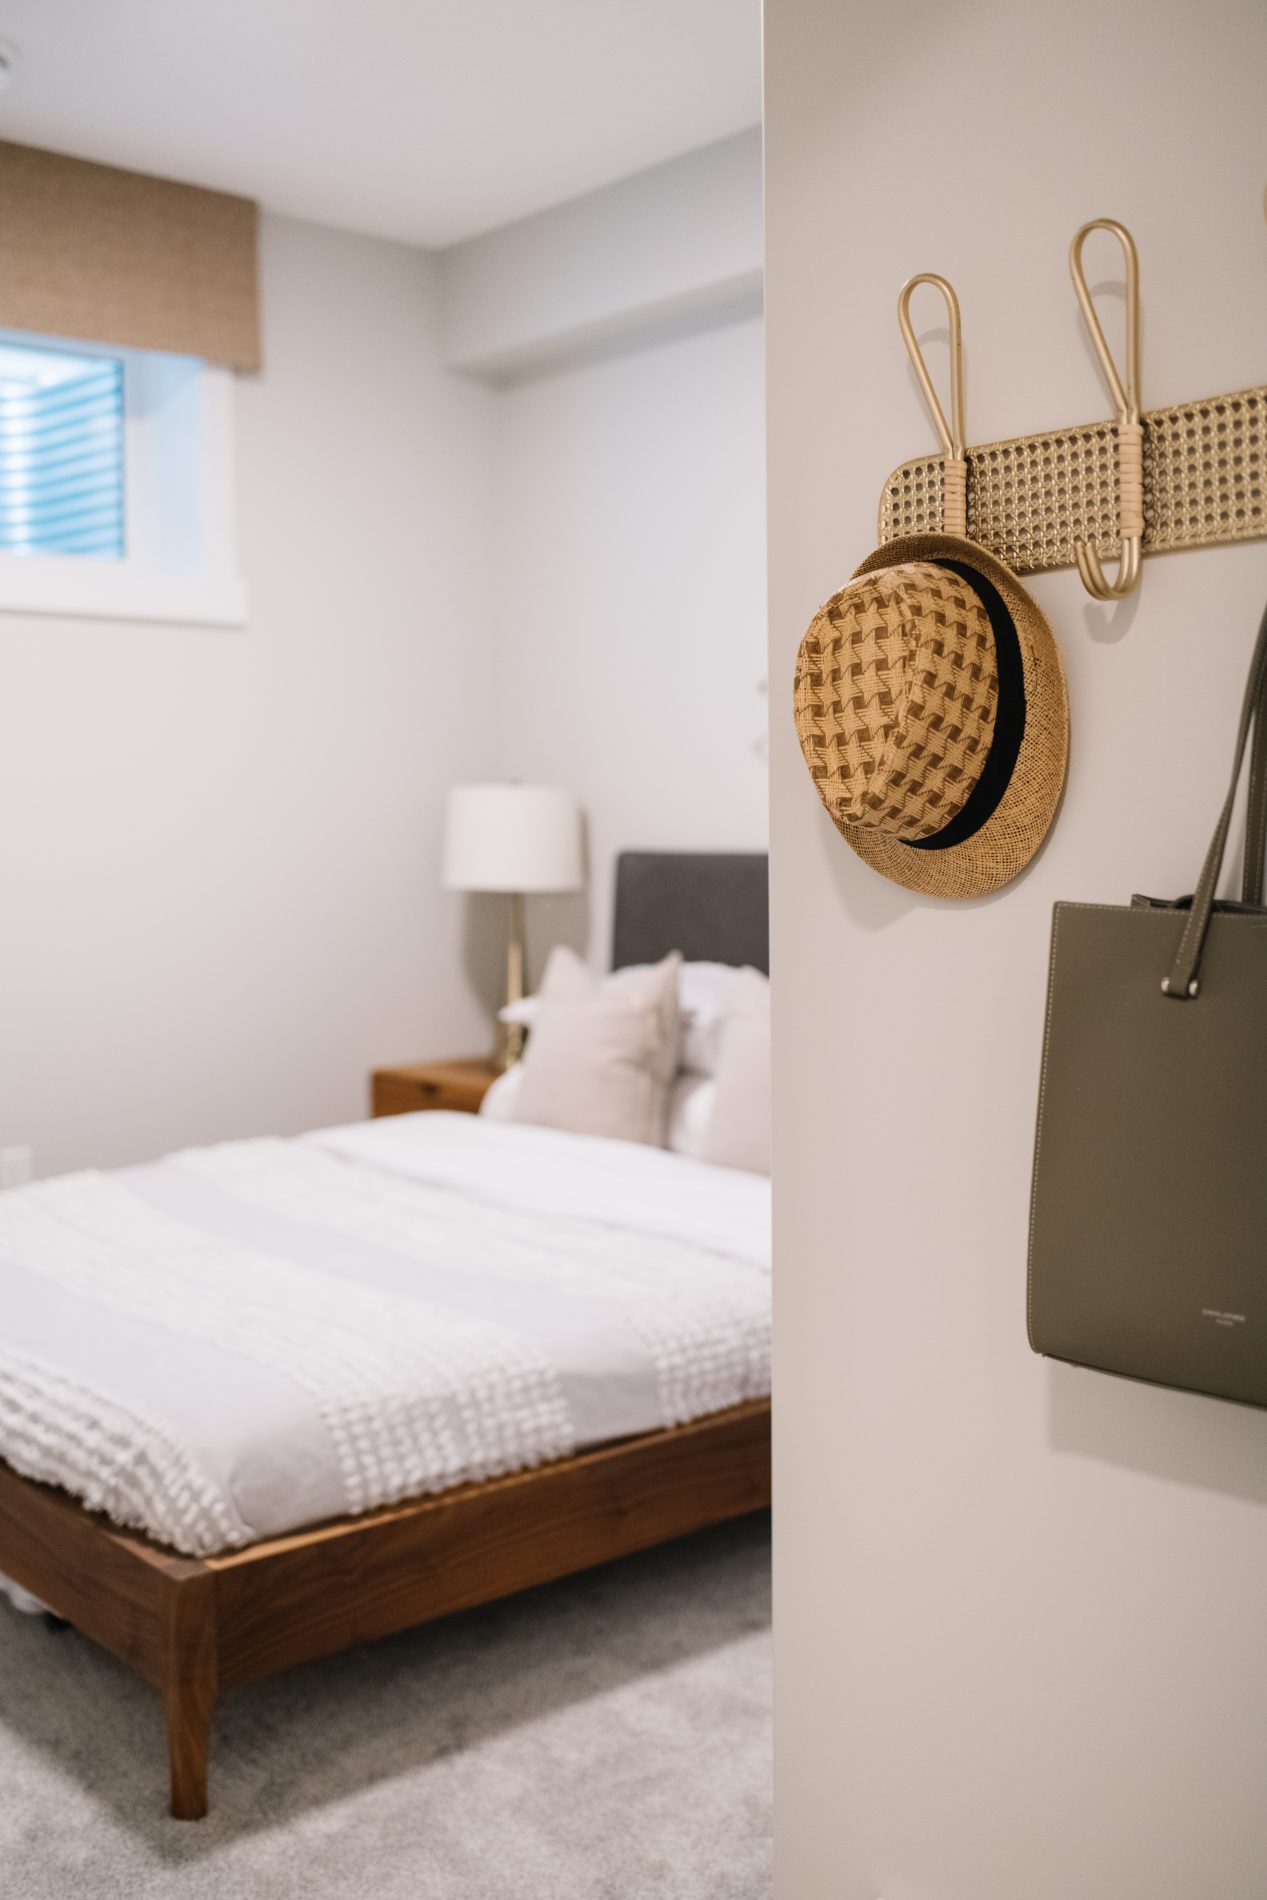 Basement bedroom with hooks for a hat and bag as you enter the room